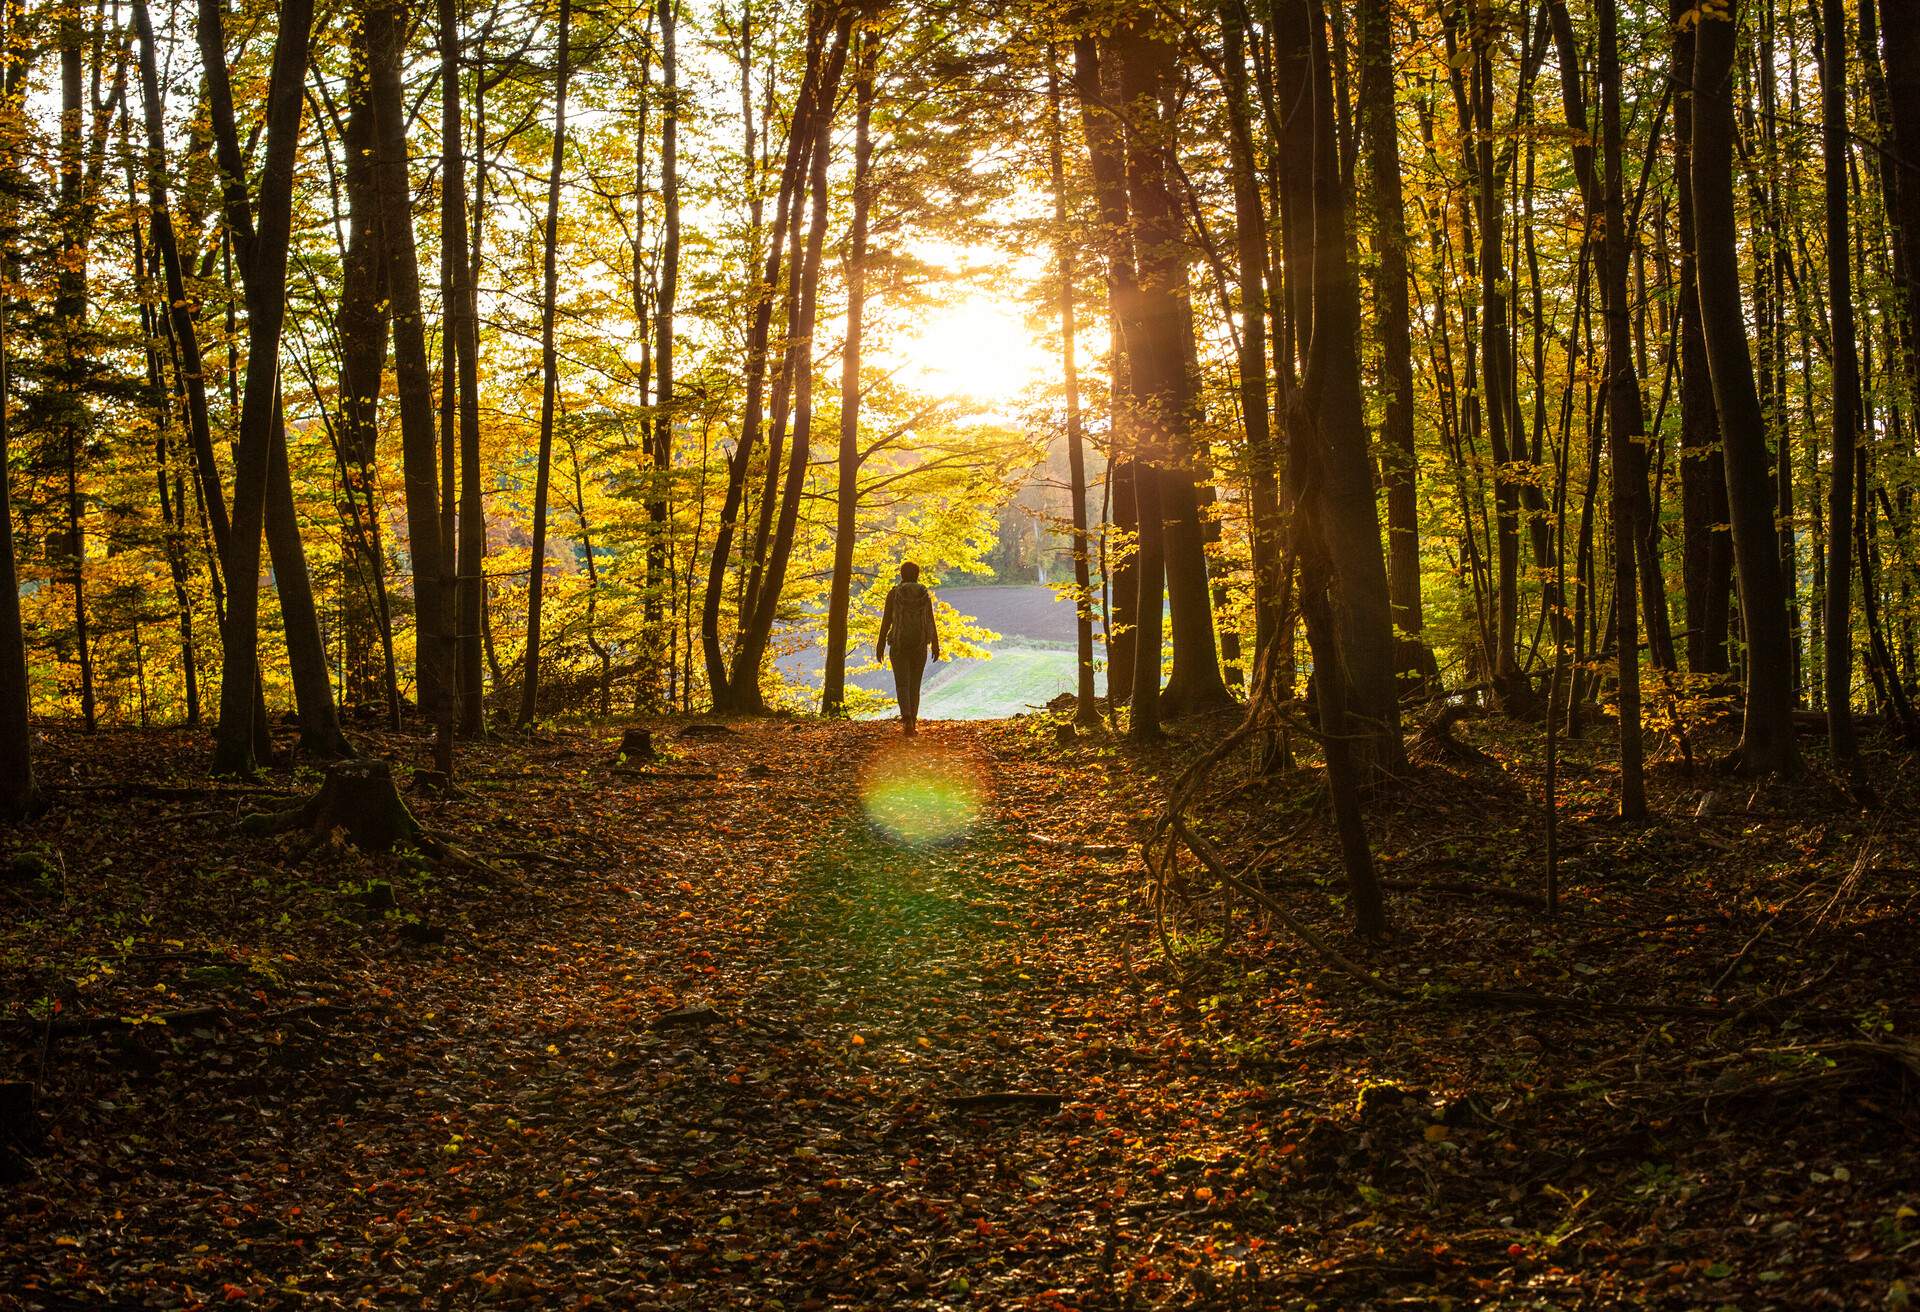 THEME_NATURE_PEOPLE_WOMAN_WALKING_FOREST_SUNSET_AUTUMN_GettyImages-1302974682-4.jpg